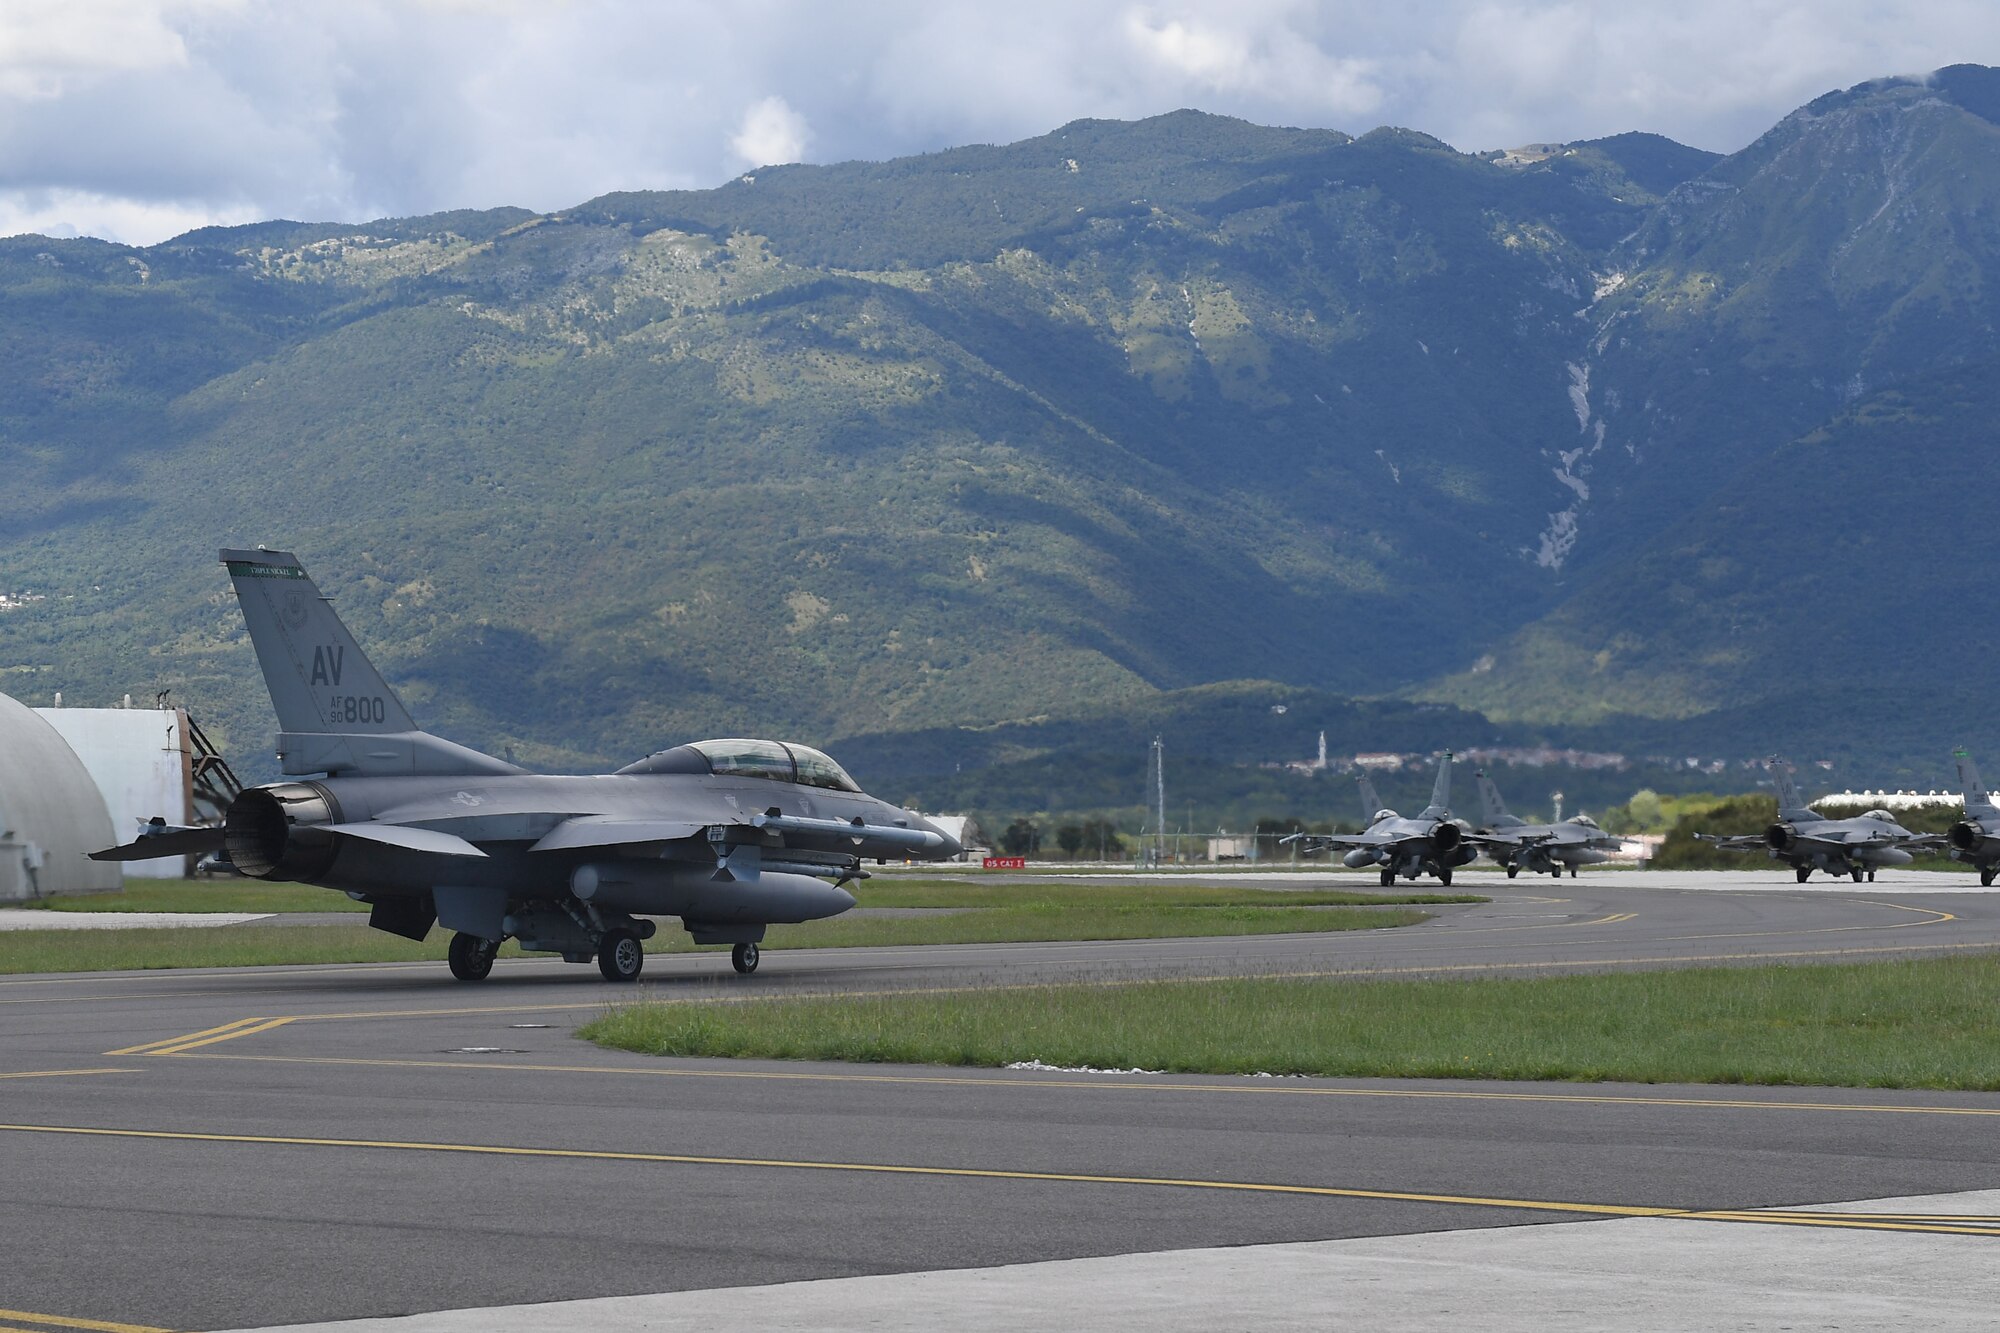 U.S. Air Force Staff Sgt. Devon Kercher, 31st Operations Support Squadron Radar Approach Control senior watch supervisor, and a U.S. Air Force F-16 Fighting Falcon pilot taxi on the flightline at Aviano Air Base, Italy, Sept. 3, 2020. Kercher was recently recognized as the 2019 U.S. Air Forces in Europe Air Traffic Controller of the Year and participated in a familiarization flight. (U.S. Air Force photo by Staff Sgt. Valerie Halbert)